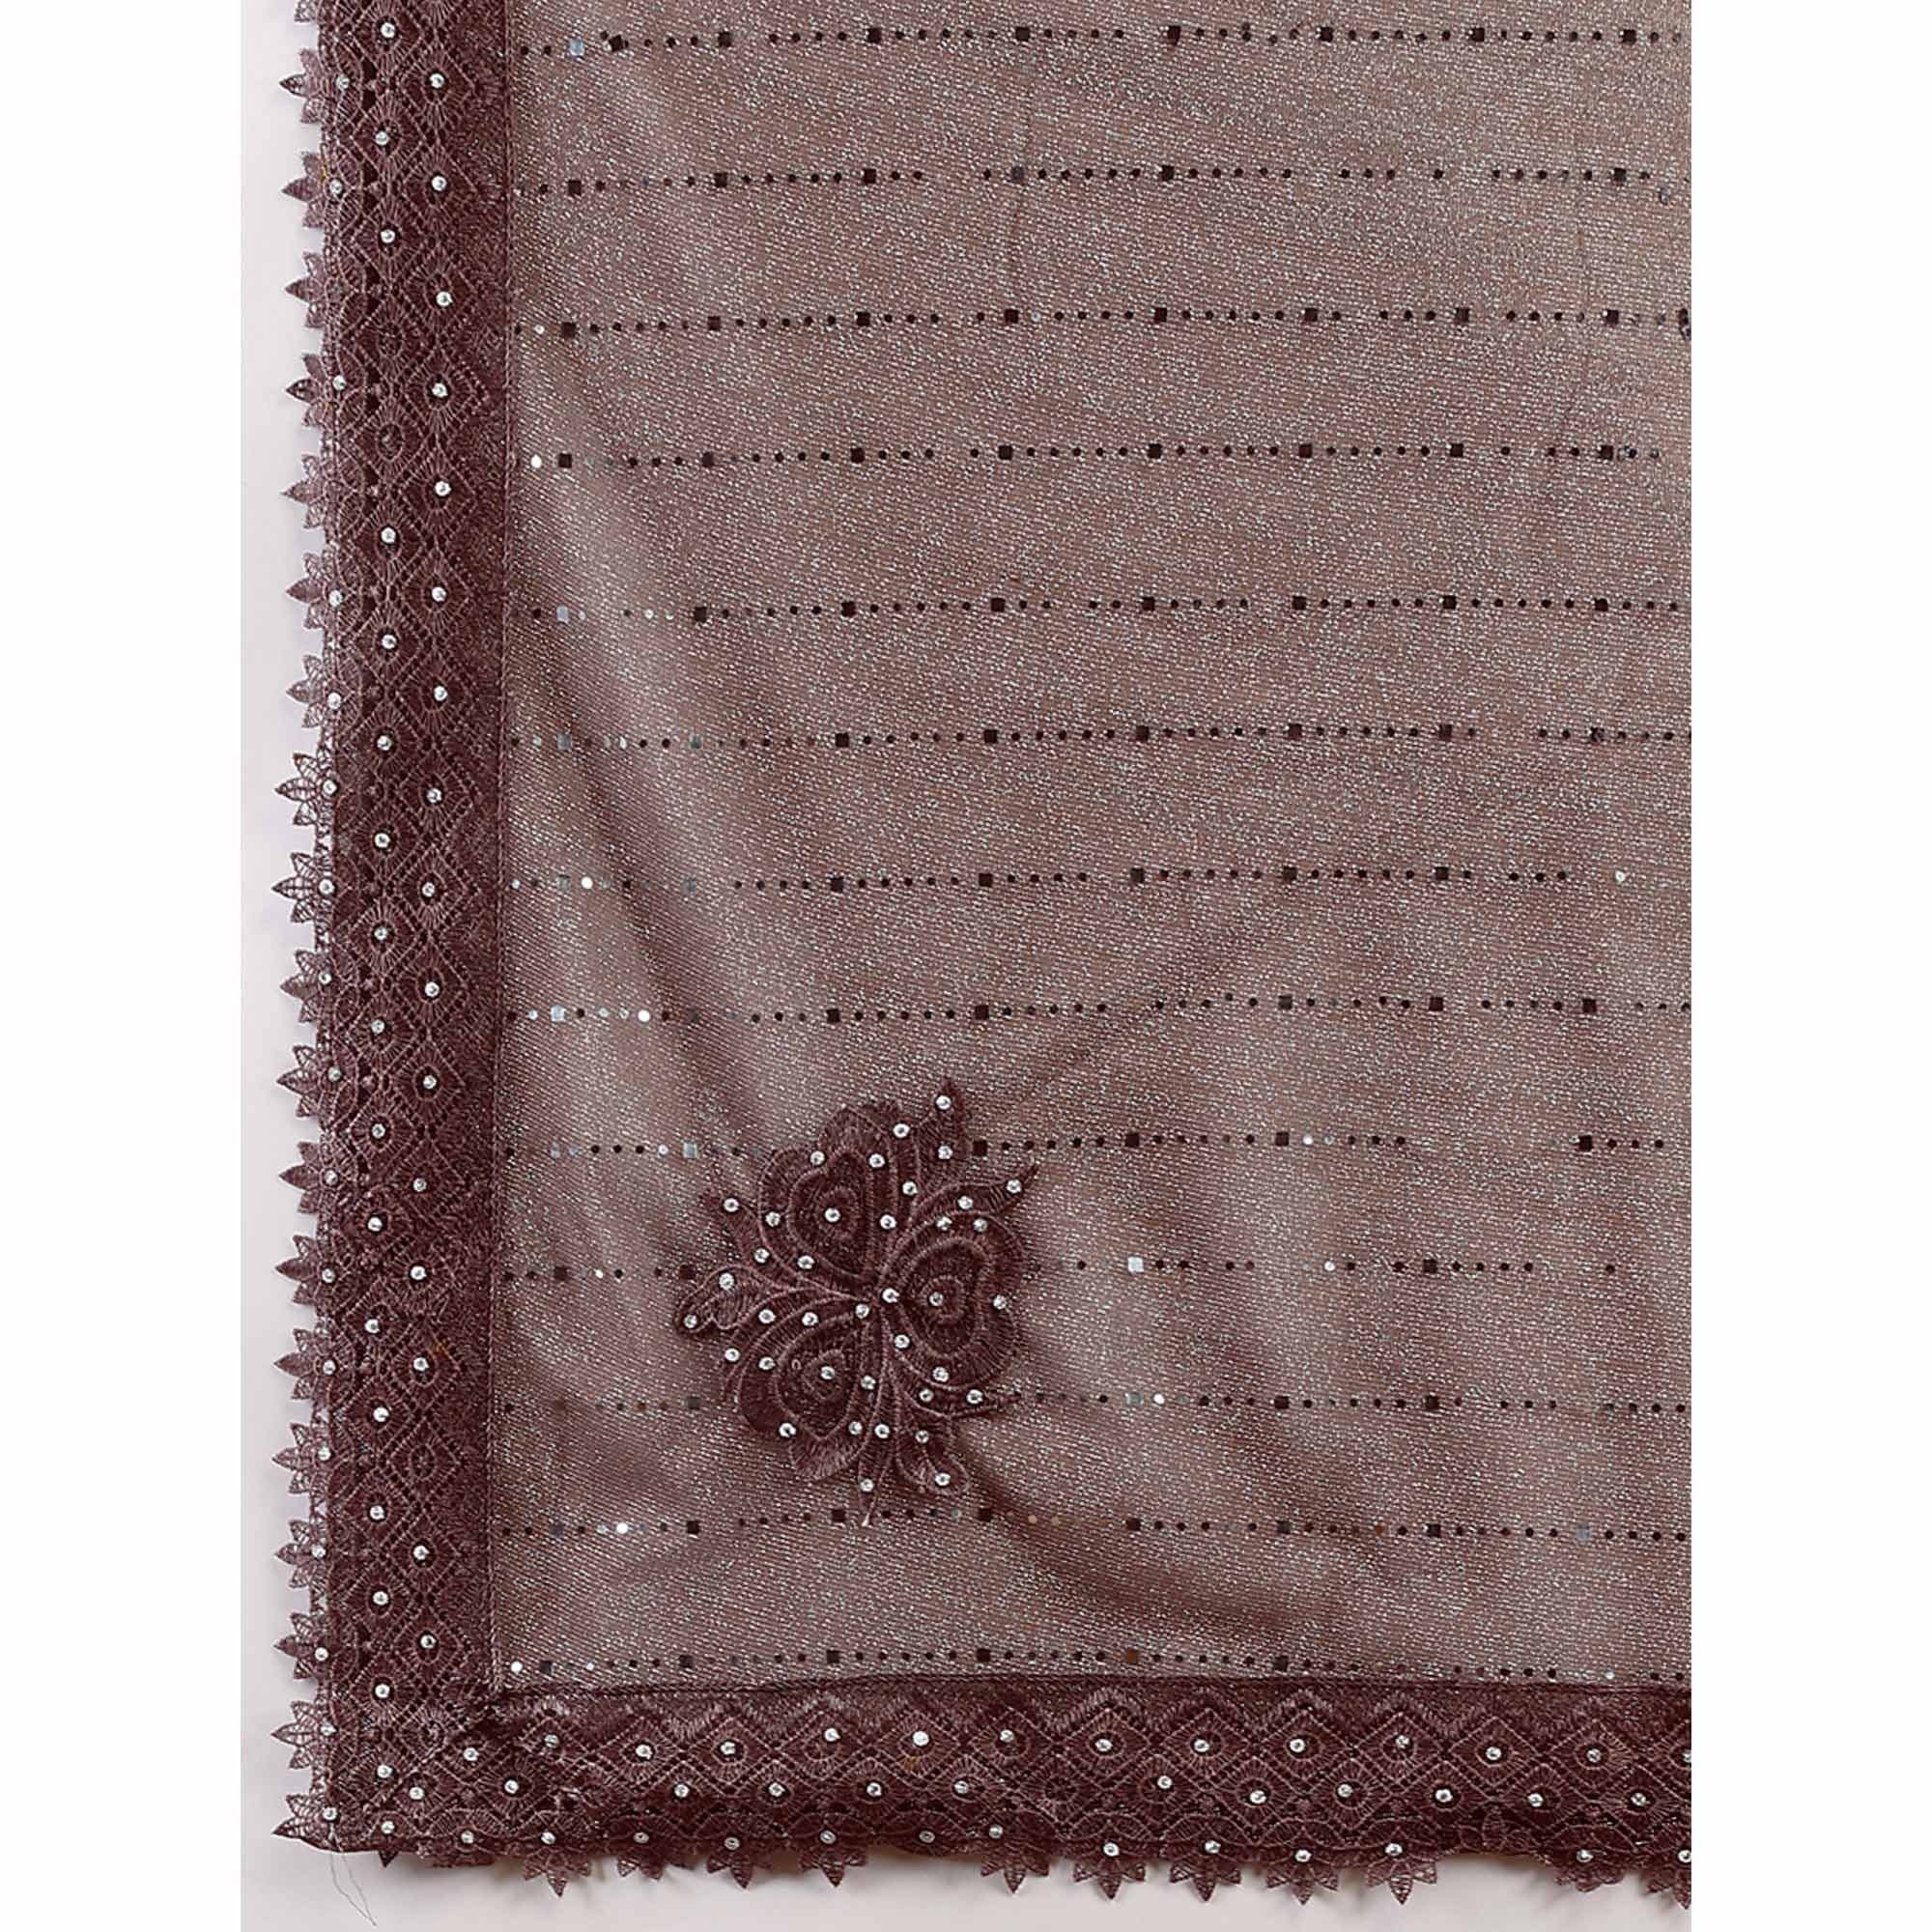 Brown Tikali With Floral Embroidered Lycra Saree